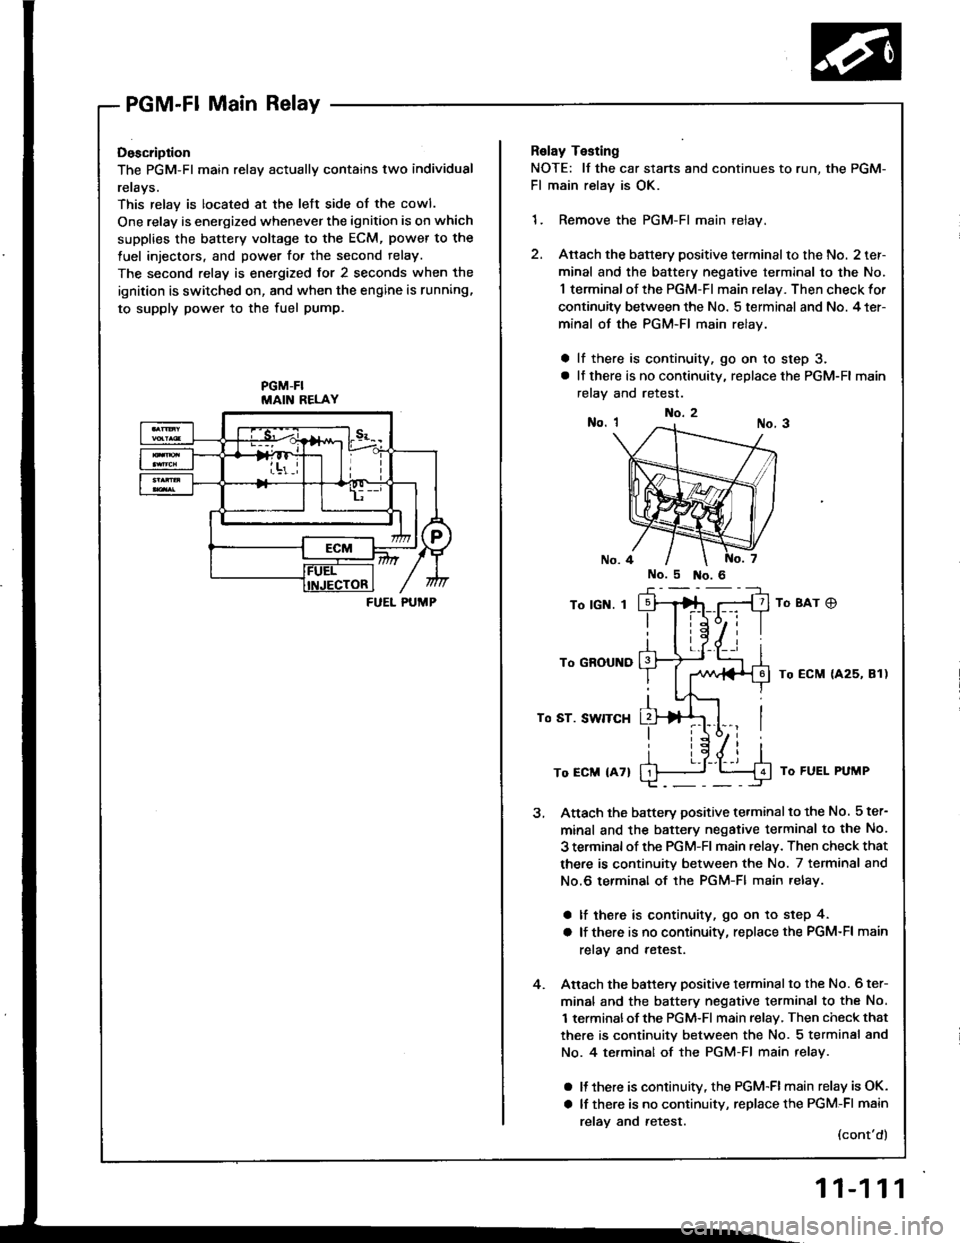 HONDA INTEGRA 1994 4.G User Guide PGM-Fl Main Relay
Doscription
The PGM-Fl main relav actuallv contains two individual
rerays.
This relay is located at the lett side of the cowl.
One relay is energized whenever the ignition is on whic